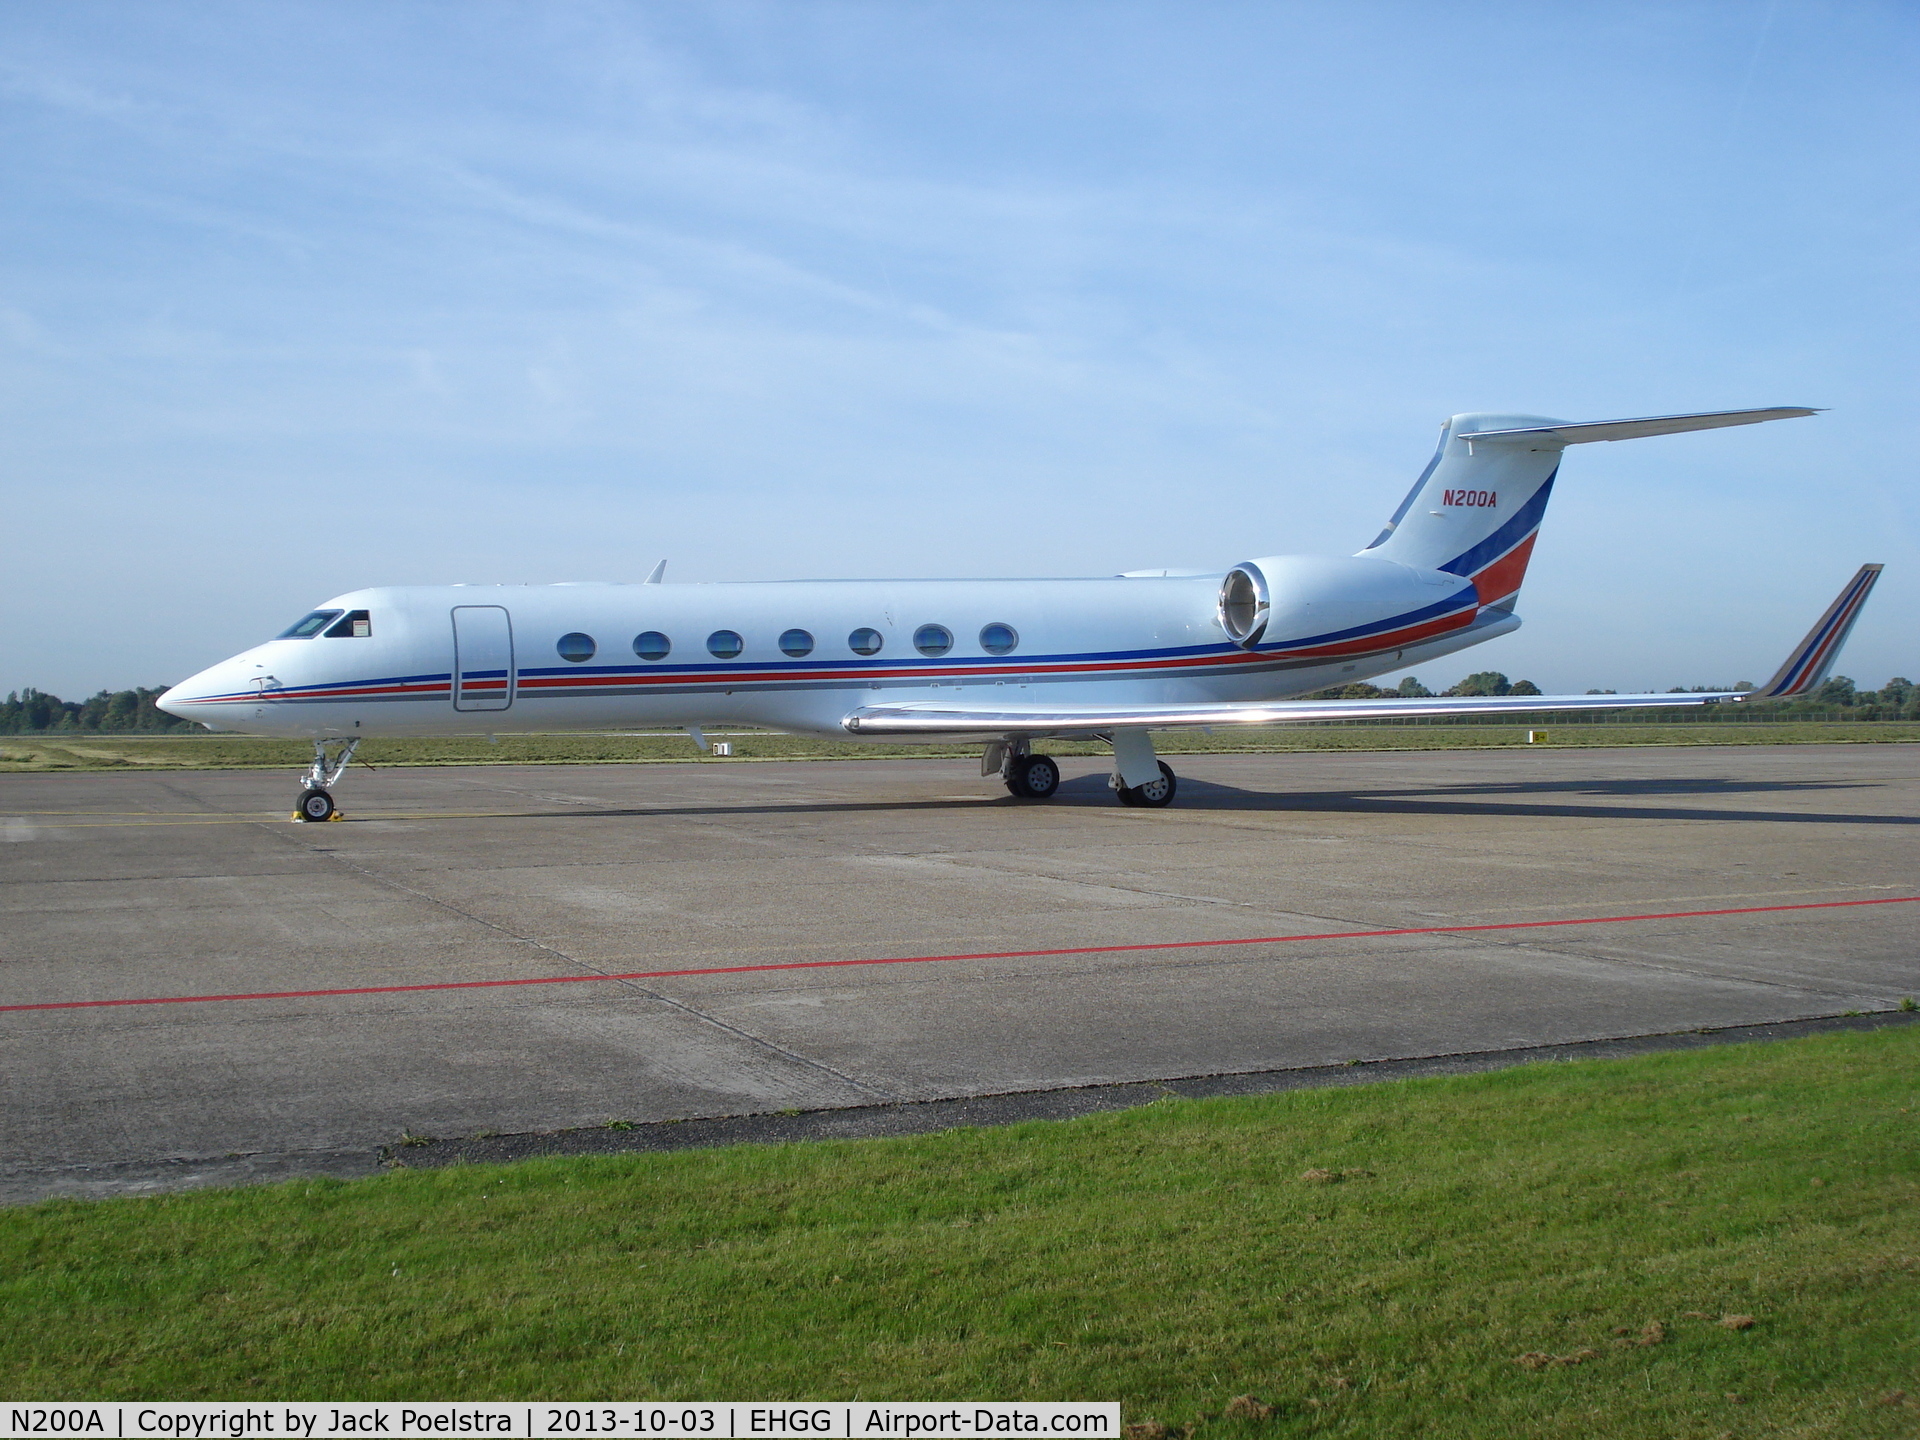 N200A, 2006 Bombardier BD-700-1A10 Global Express C/N 9203, BD-700 at ramp of Groningen airport